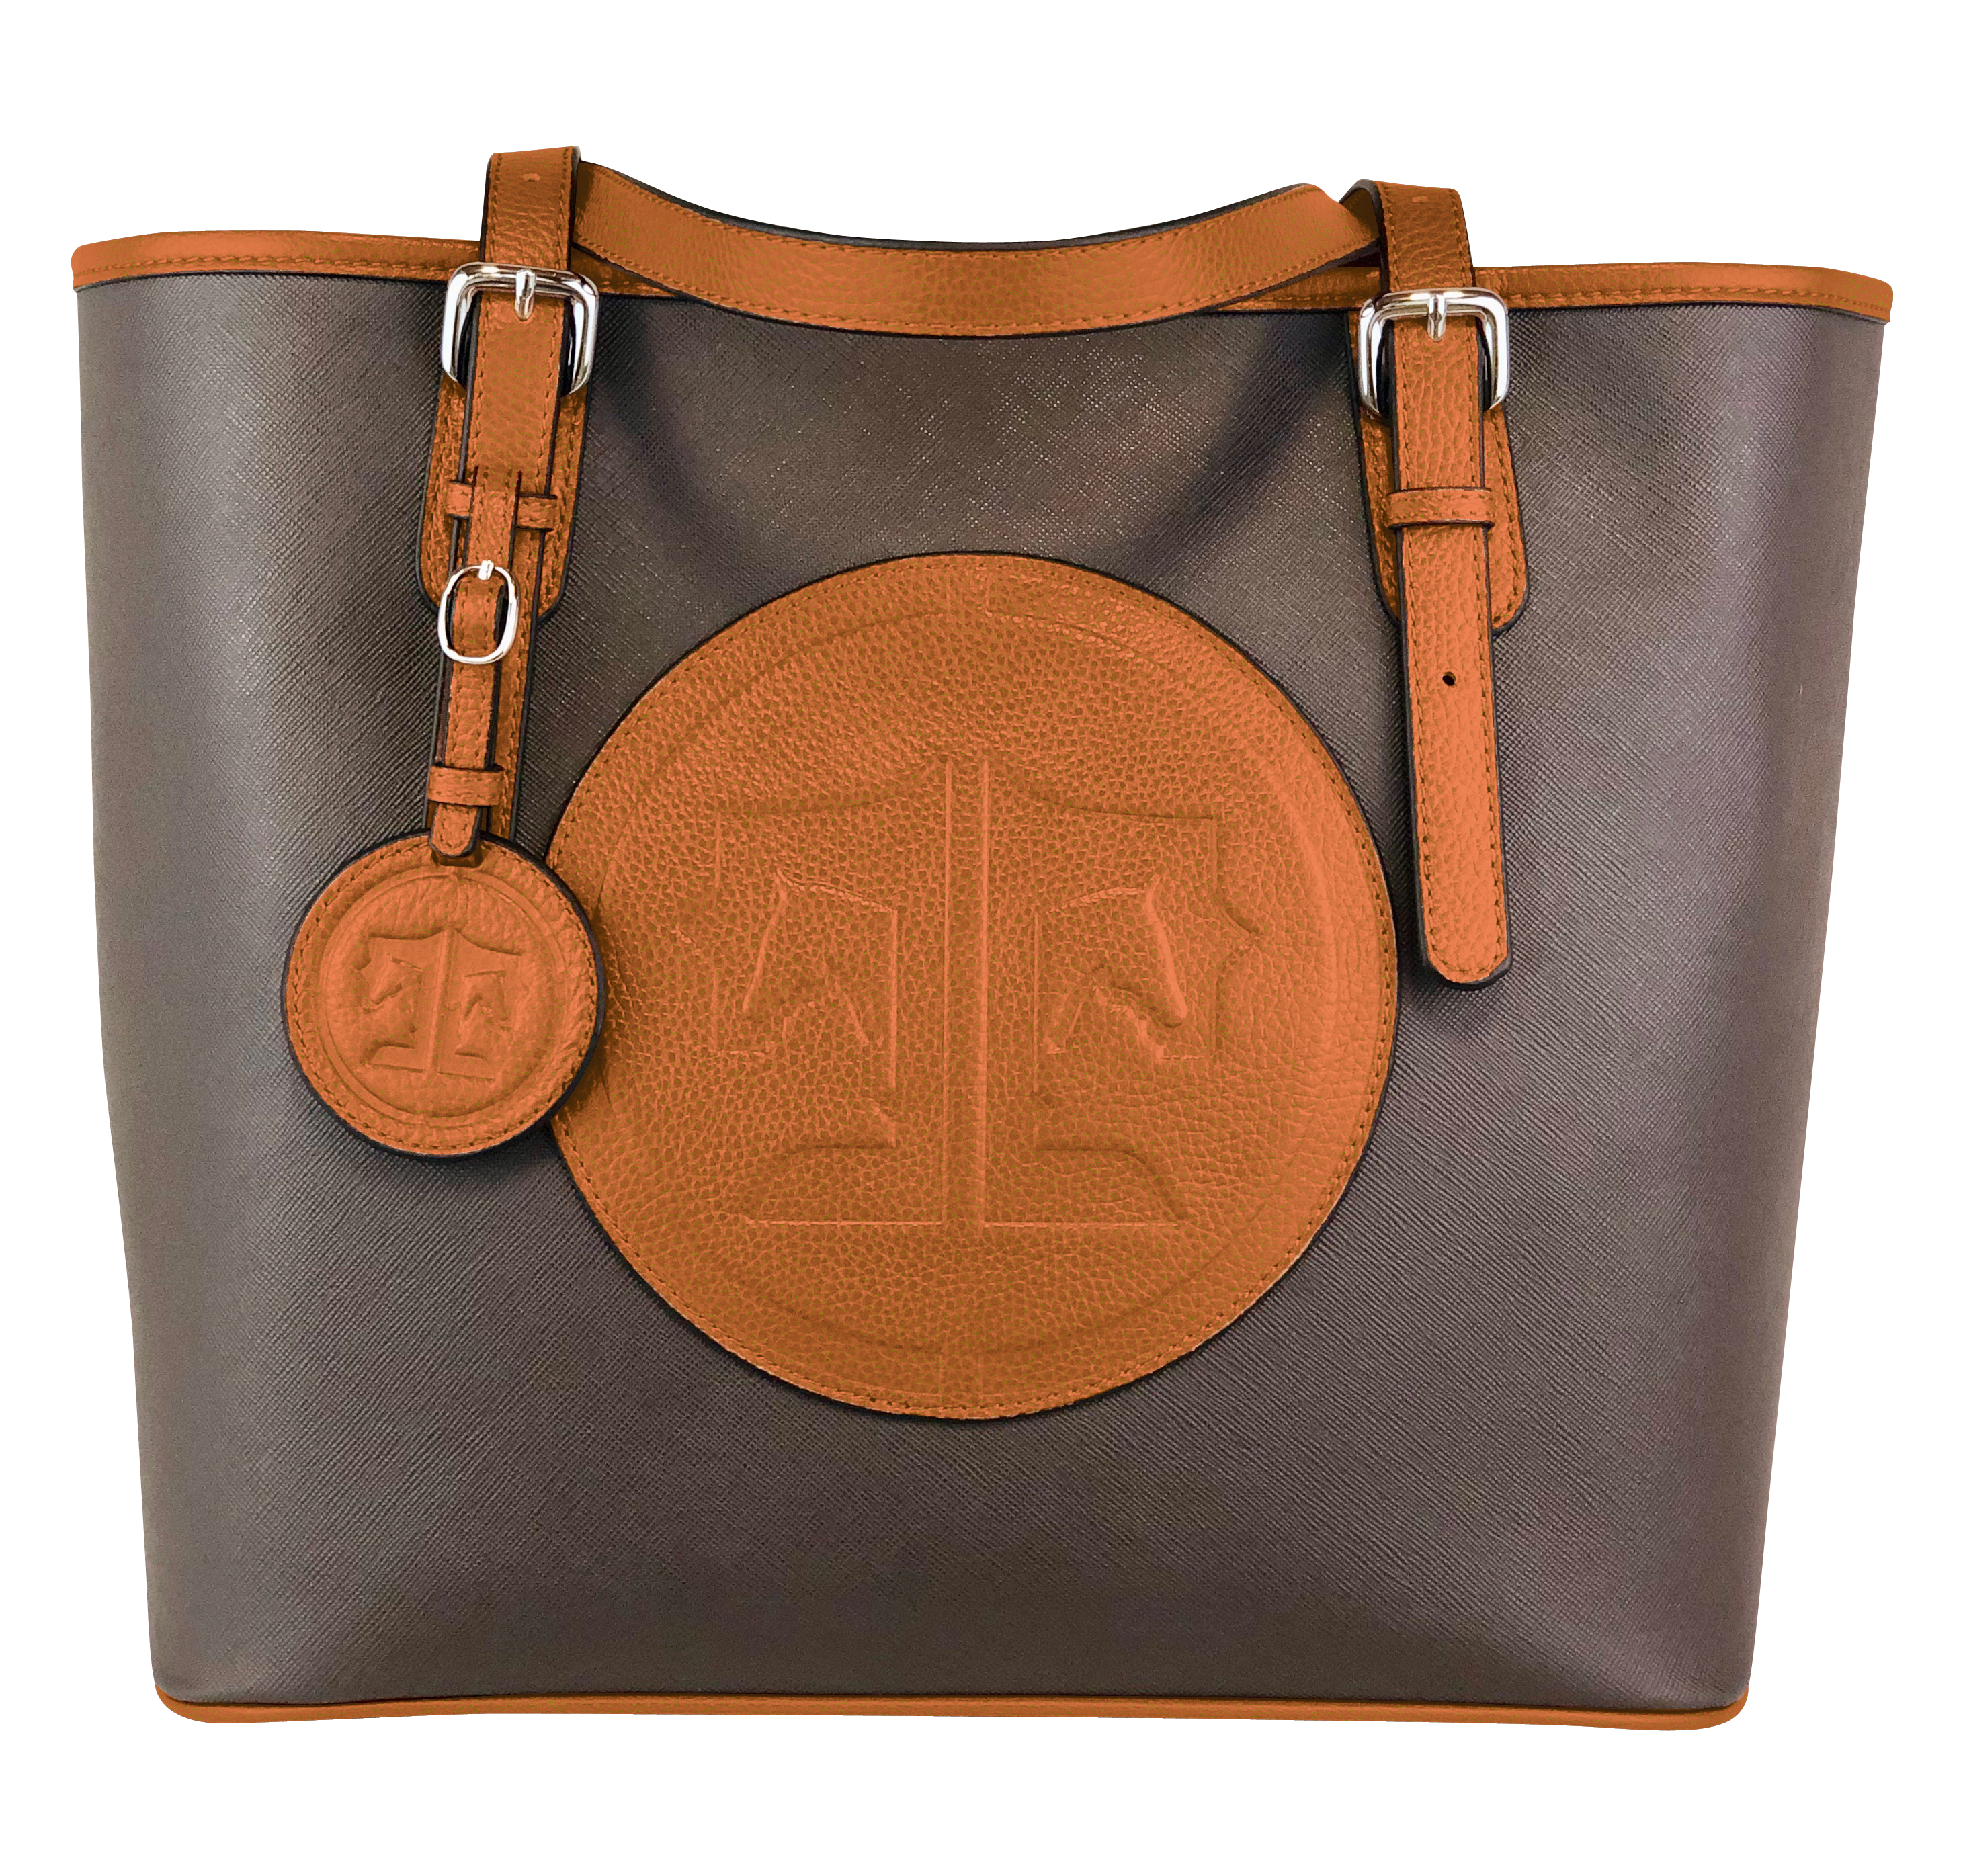 Tucker Tweed Leather Handbags Espresso/Chestnut The James River Carry All: Signature